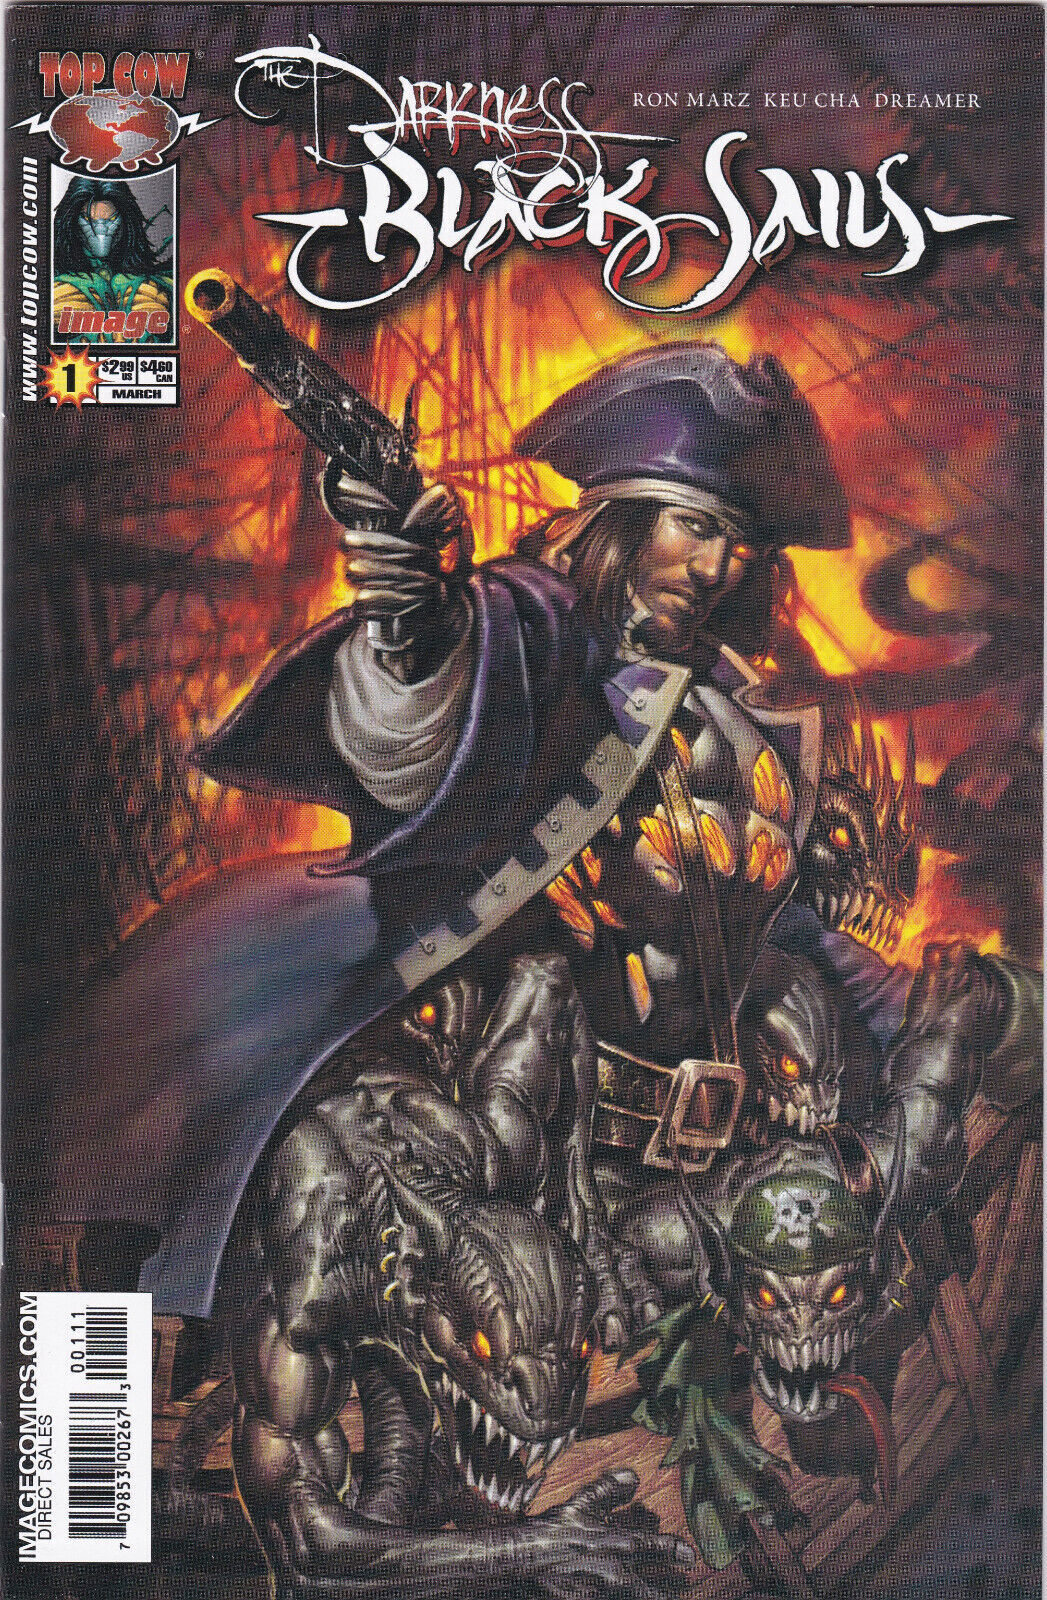 THE DARKNESS: BLACK SAILS #1 ONE-SHOT (TOP COW IMAGE 2005) High Grade